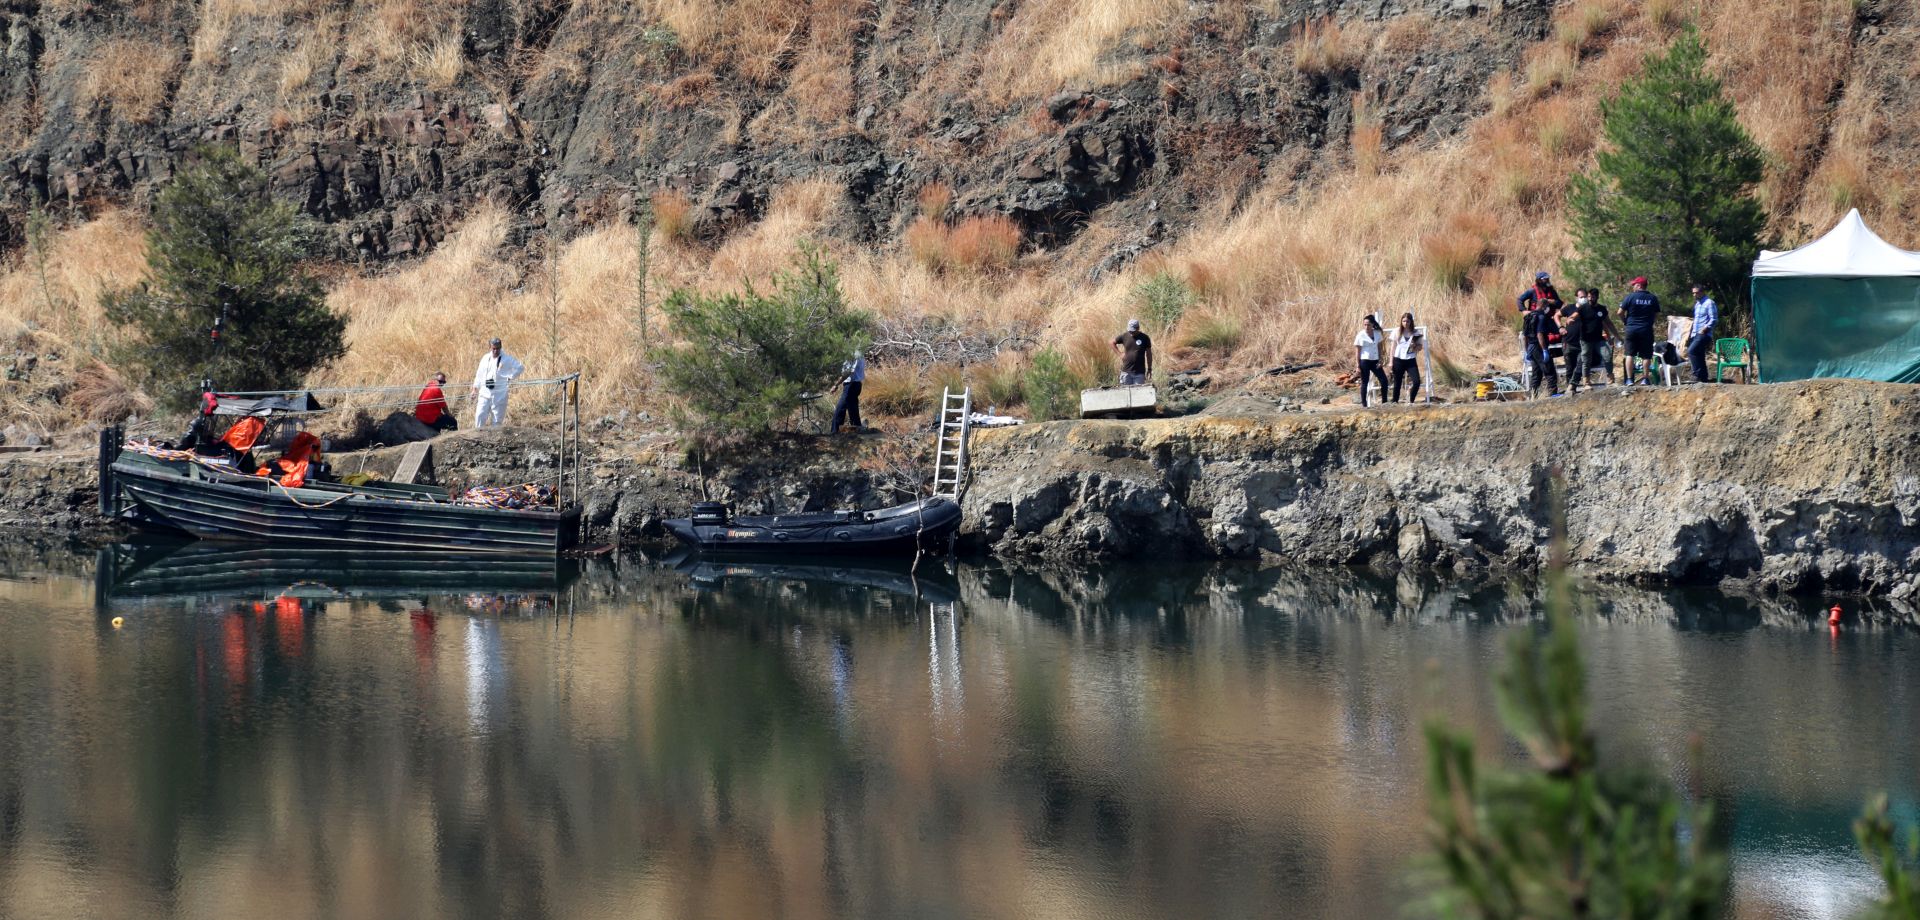 epa07643861 Cyprus police personnel carry a stretcher containing what is believed to be remains of a 6-year-old girl, near the village of Xiliatos, Cyprus, 12 June 2019. TA Cyprus police official says divers searching the bottom of a lake have discovered the remains of what authorities believe to be the remains of a 6-year-old girl that a serial killer has confessed to killing. The remains are thought to be the 7th and final victim of a 35-year-old Cyprus army captain.  EPA/KATIA CHRISTODOULOU